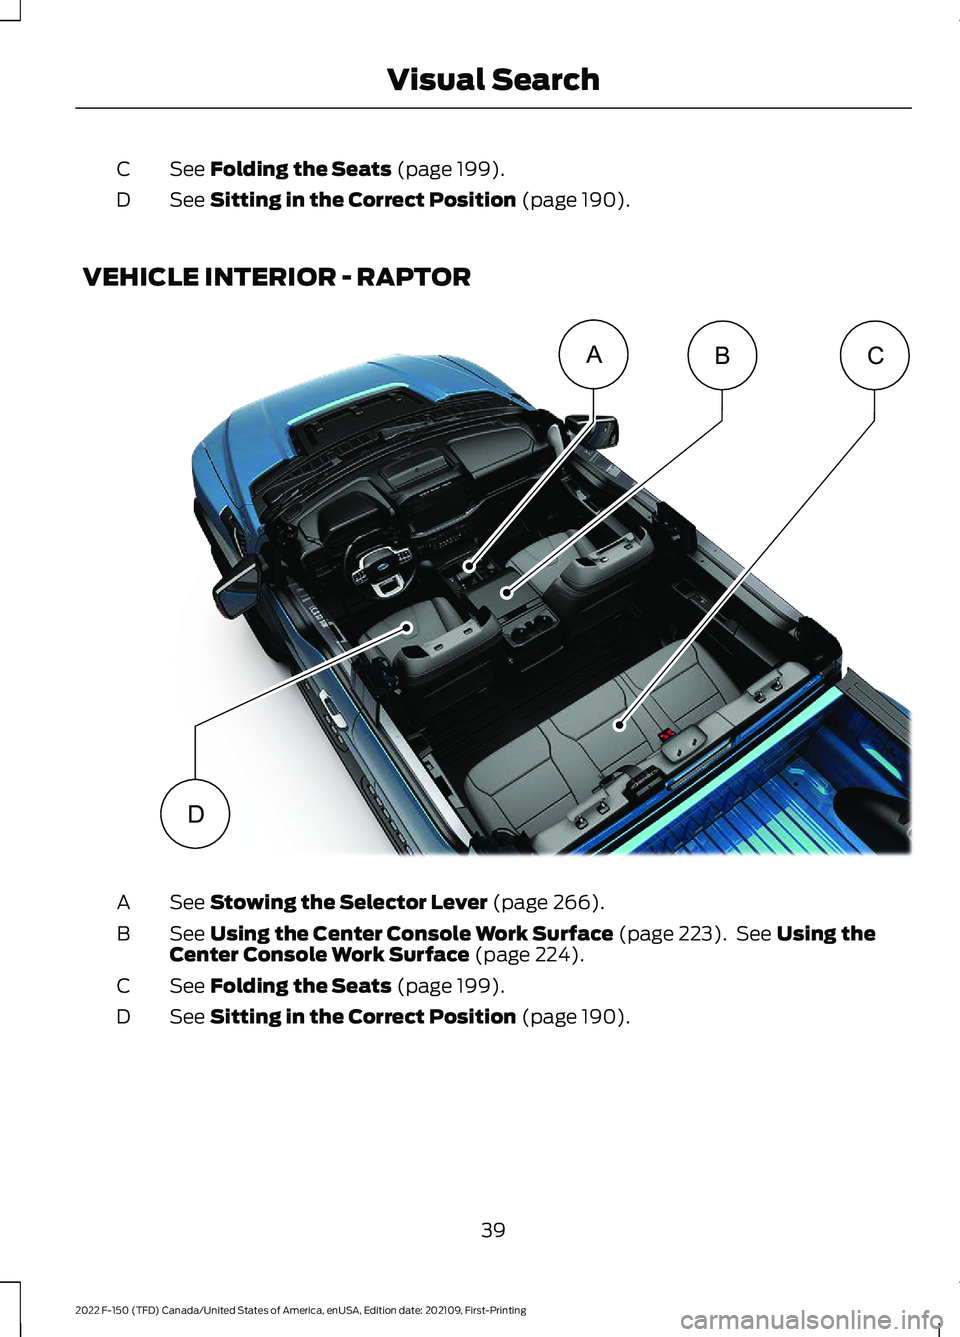 FORD F-150 2022  Owners Manual See Folding the Seats (page 199).
C
See 
Sitting in the Correct Position (page 190).
D
VEHICLE INTERIOR - RAPTOR See 
Stowing the Selector Lever (page 266).
A
See 
Using the Center Console Work Surfac